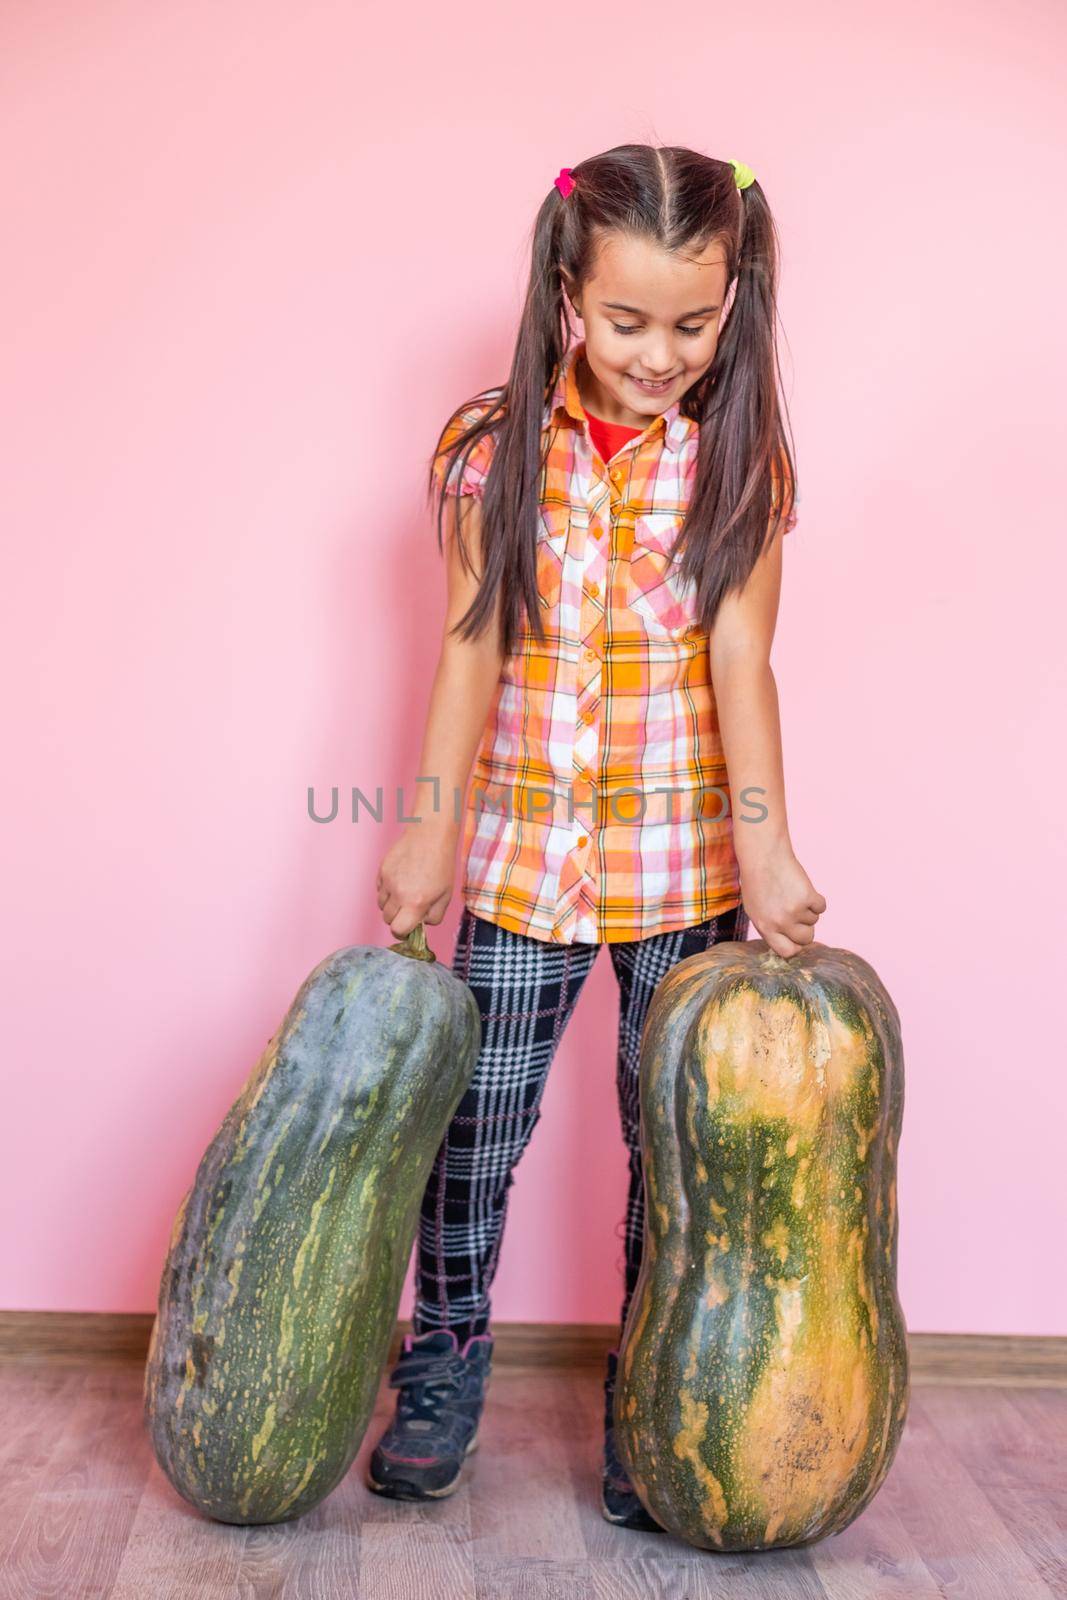 Beautiful girl with pumpkin on a pink background